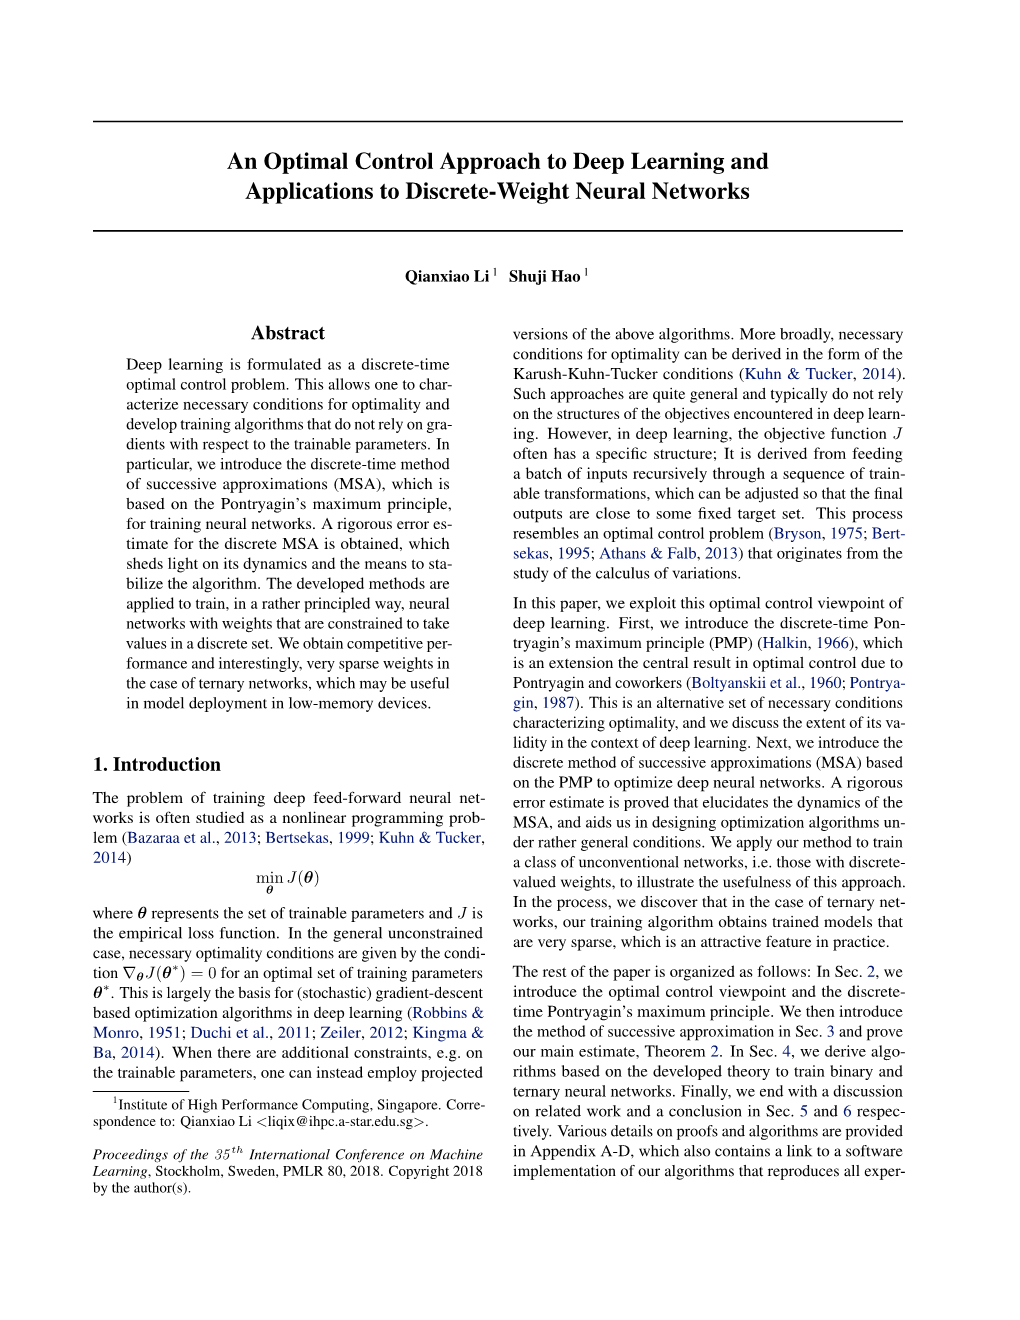 An Optimal Control Approach to Deep Learning and Applications to Discrete-Weight Neural Networks